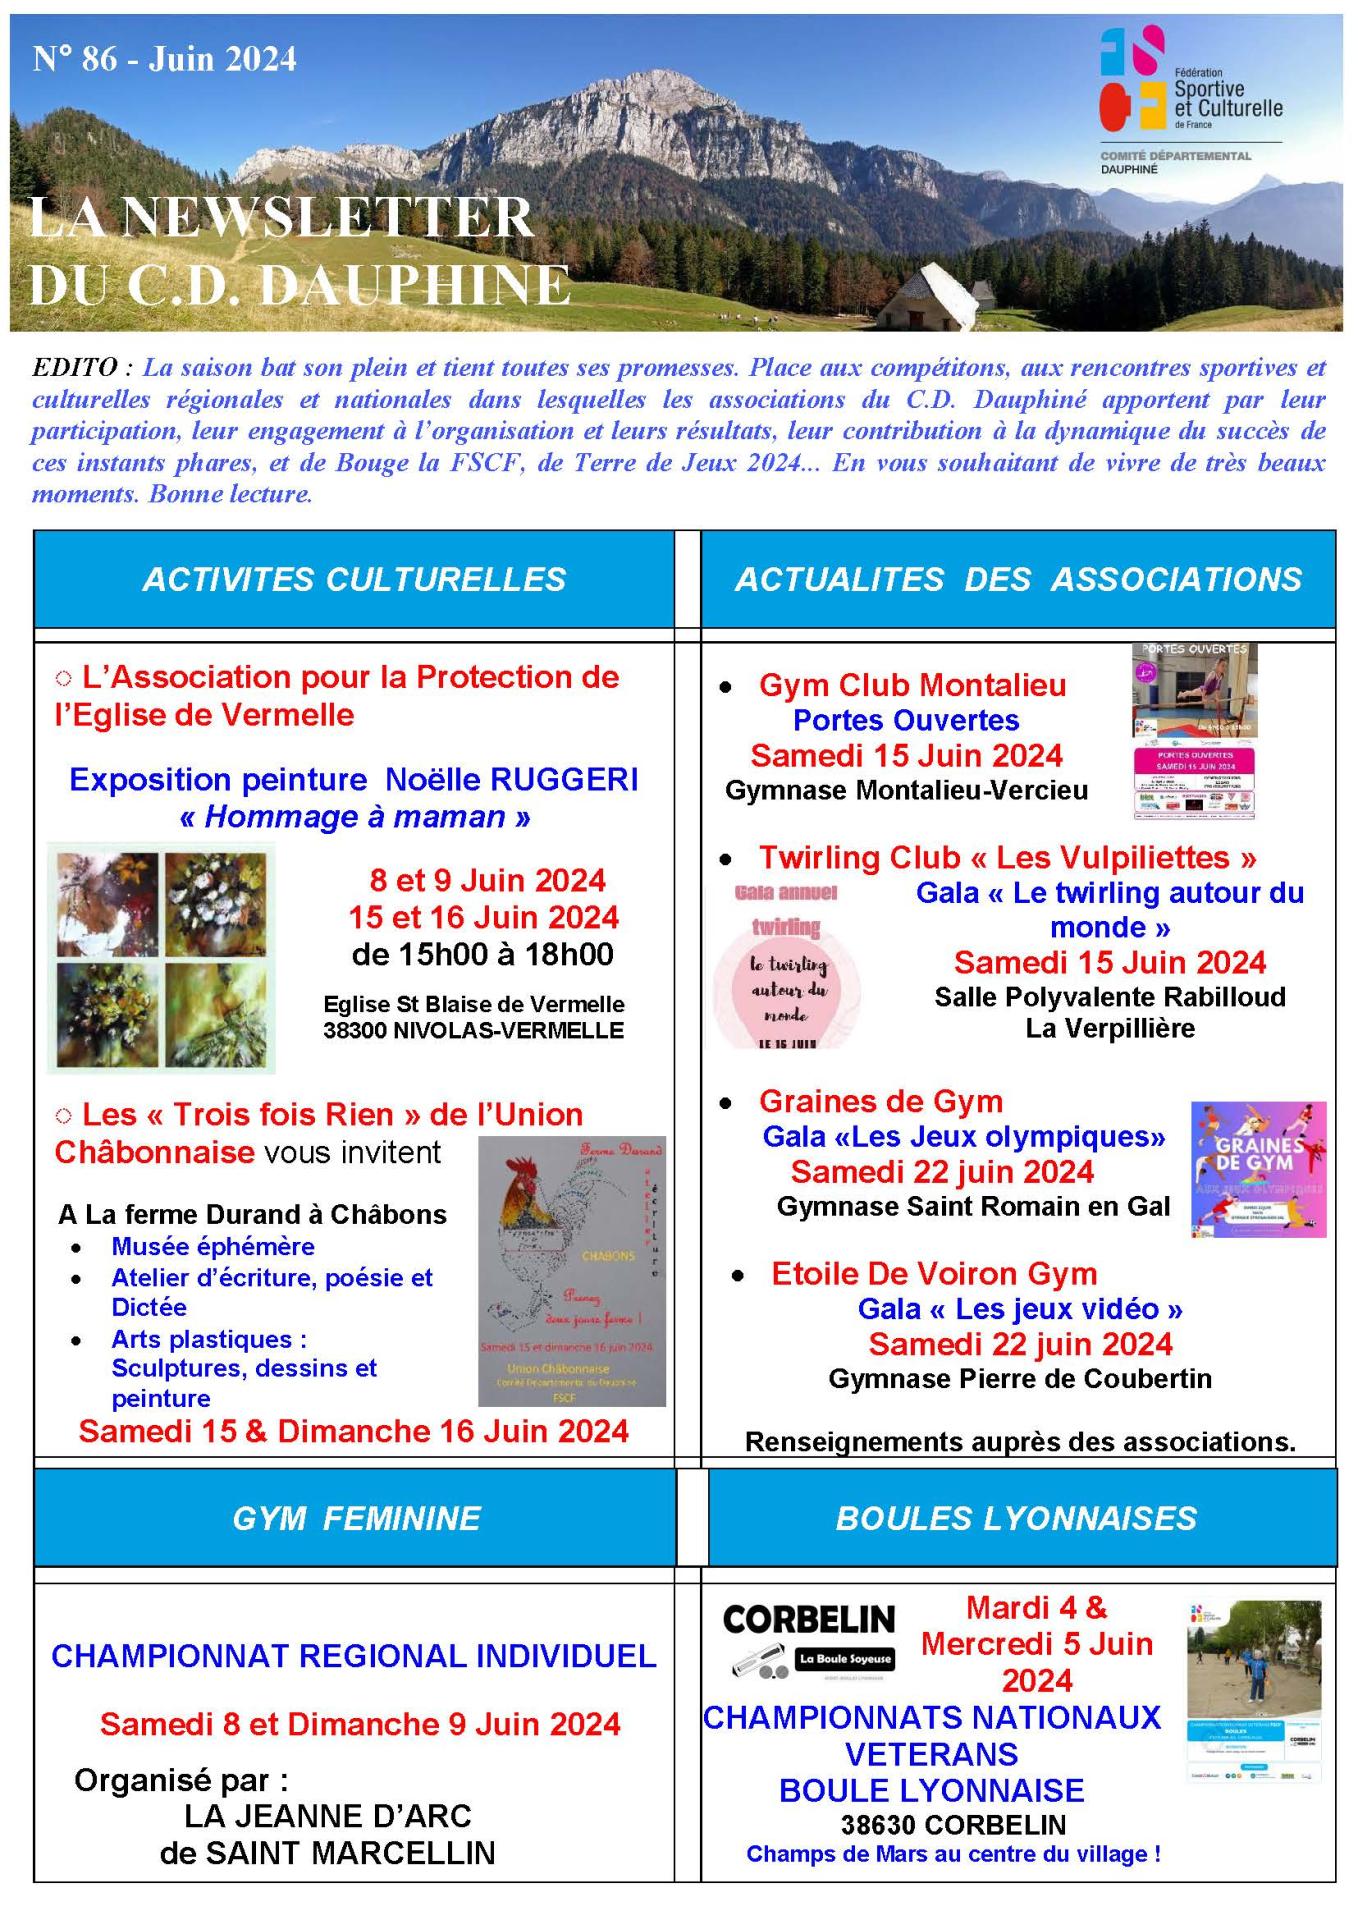 Newsletter n86 06 2024 page 1